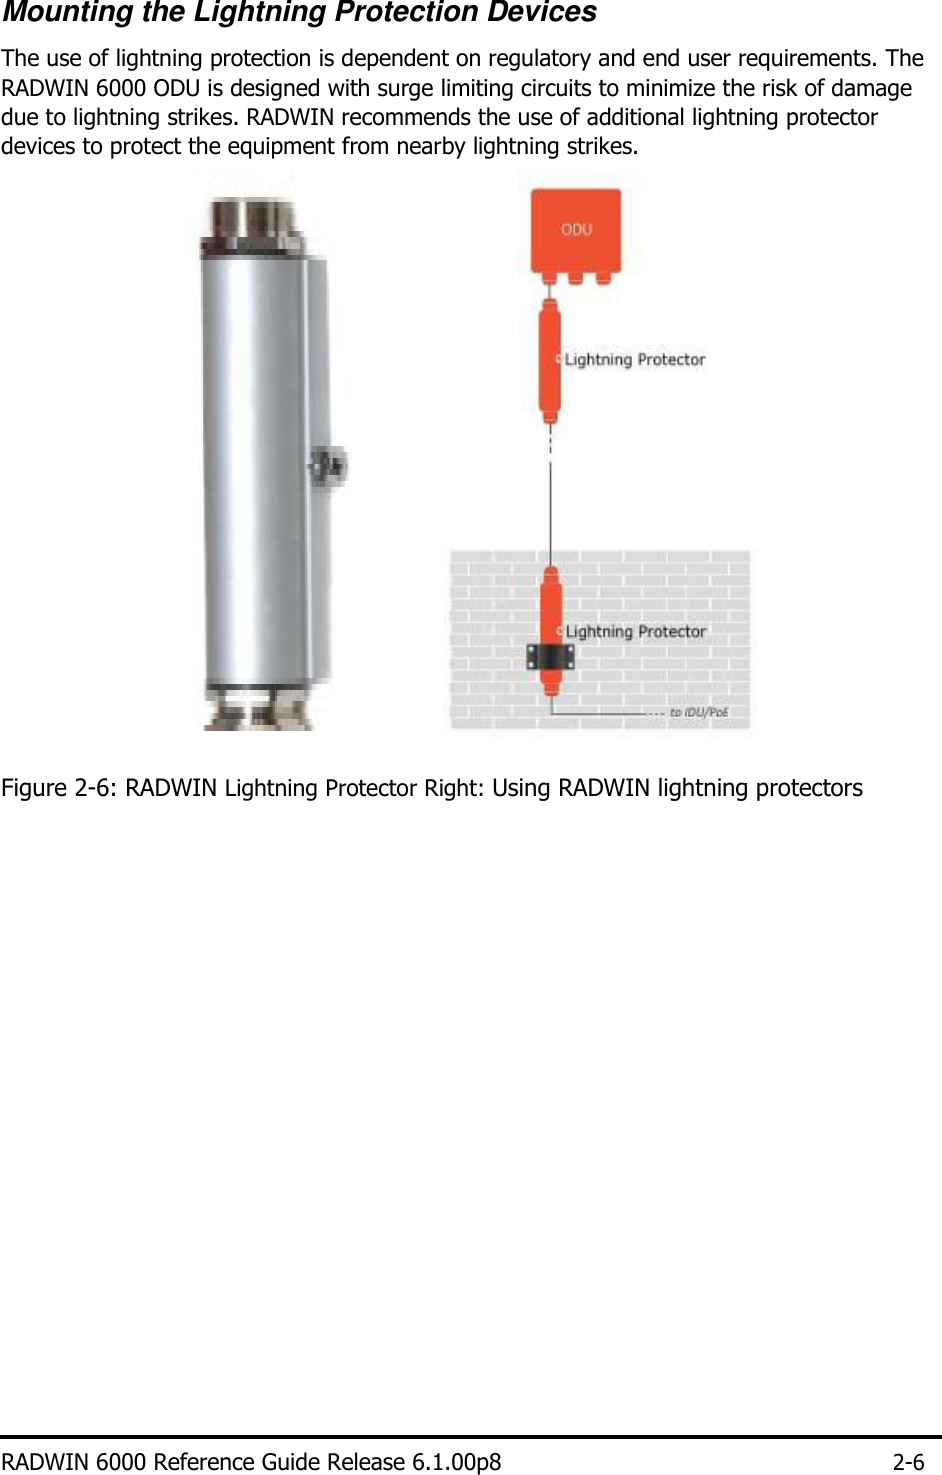   Mounting the Lightning Protection Devices  The use of lightning protection is dependent on regulatory and end user requirements. The RADWIN 6000 ODU is designed with surge limiting circuits to minimize the risk of damage due to lightning strikes. RADWIN recommends the use of additional lightning protector devices to protect the equipment from nearby lightning strikes.                              Figure 2-6: RADWIN Lightning Protector Right: Using RADWIN lightning protectors                                RADWIN 6000 Reference Guide Release 6.1.00p8 2-6 